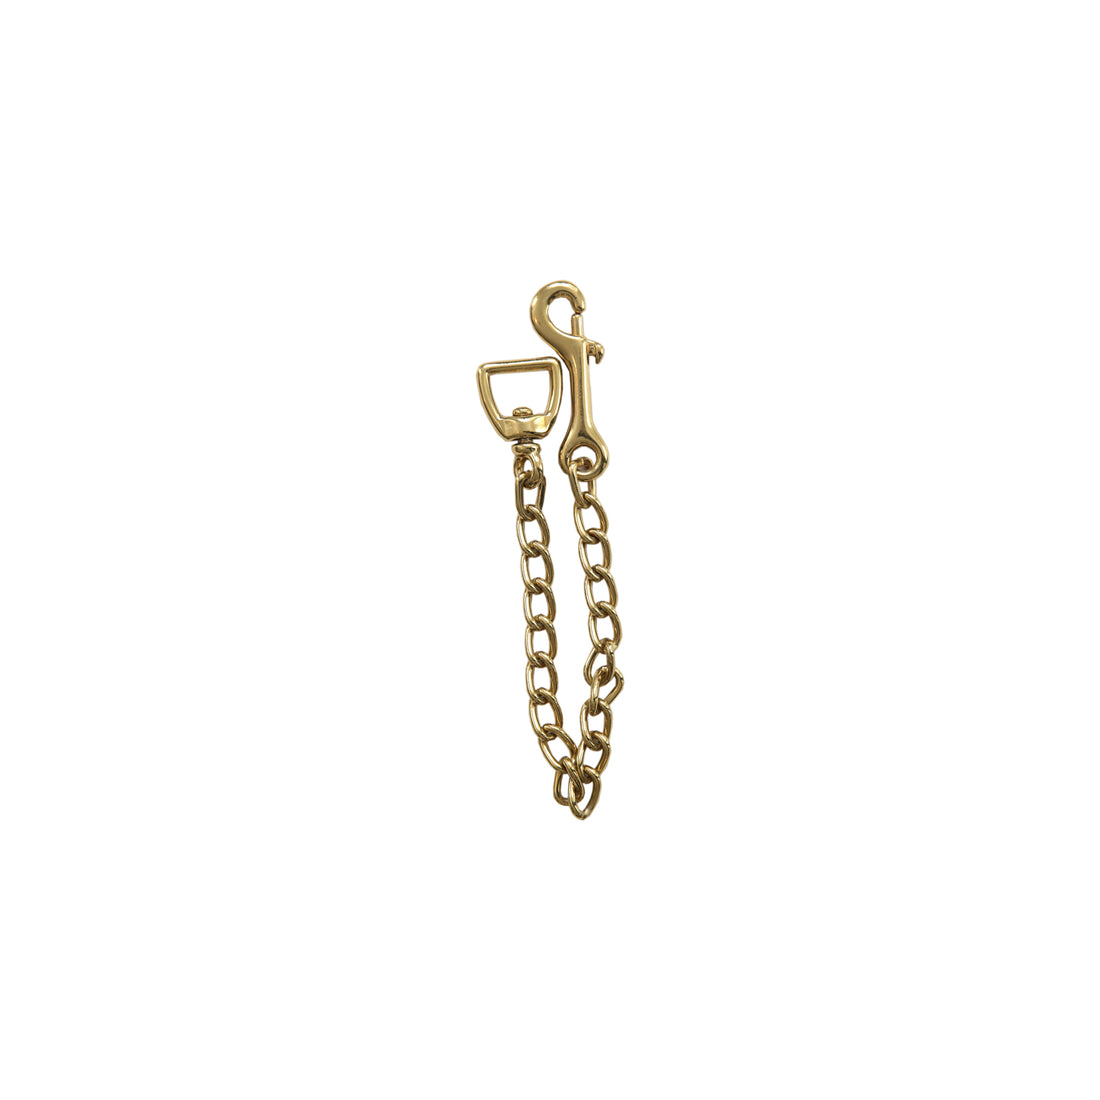 The Kentucky stallion chain is 60cm and finished in gold. This product offers more control when handling a stallion or a horse with a lot of character.